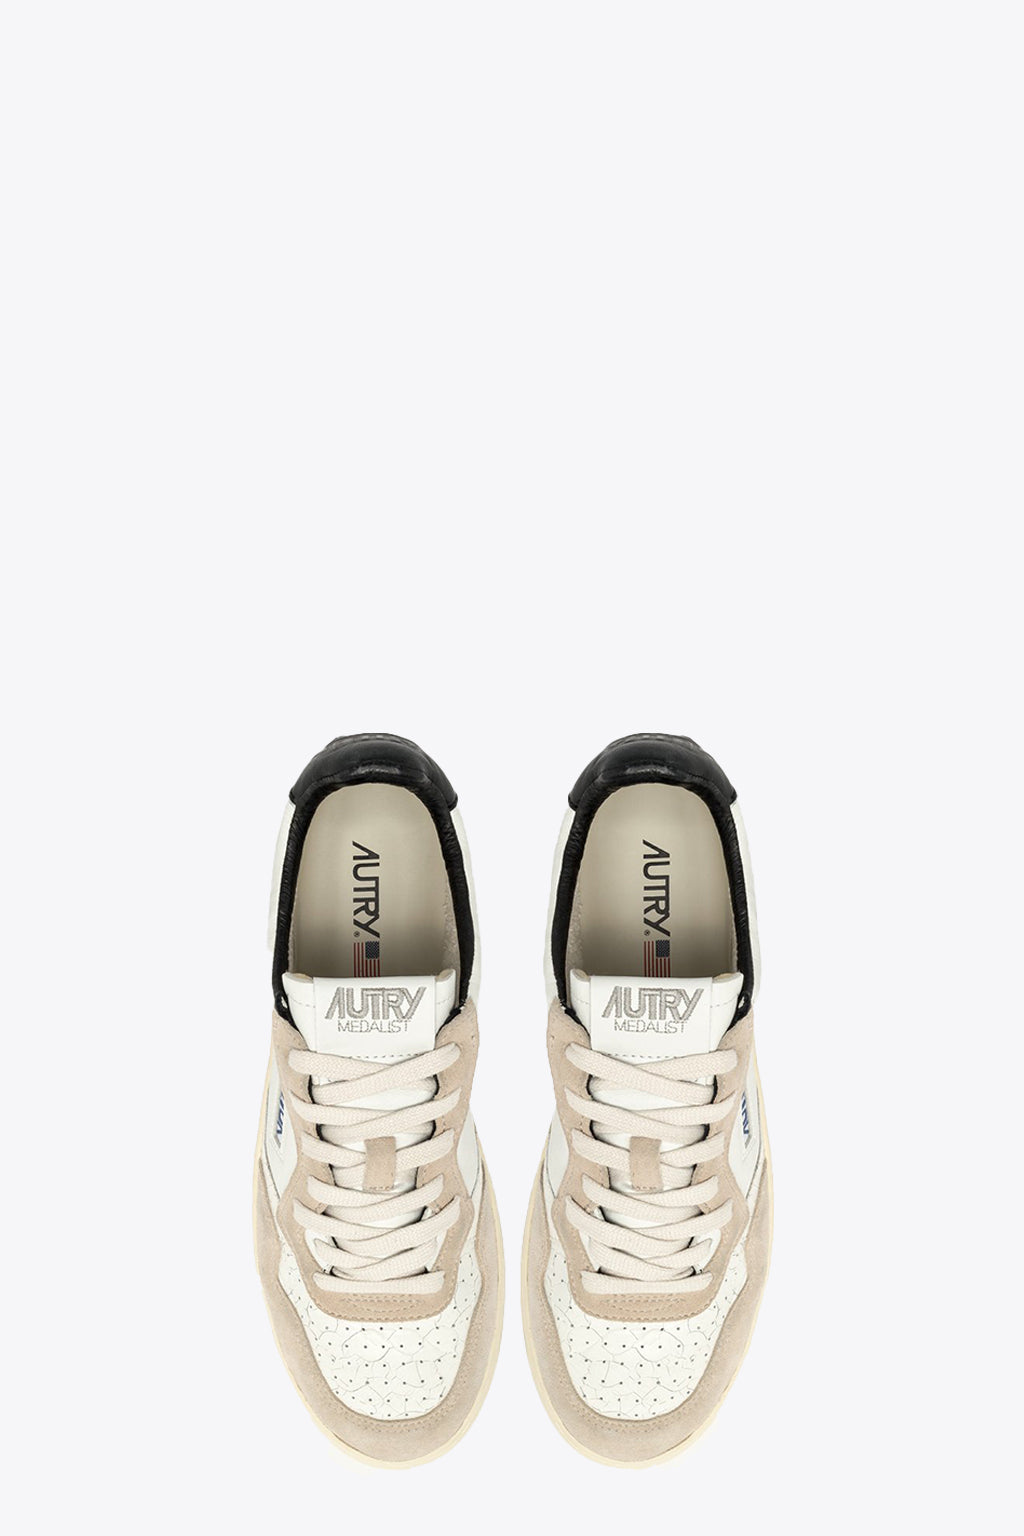 alt-image__White-leather-low-sneaker-with-black-back-tab---Medalist